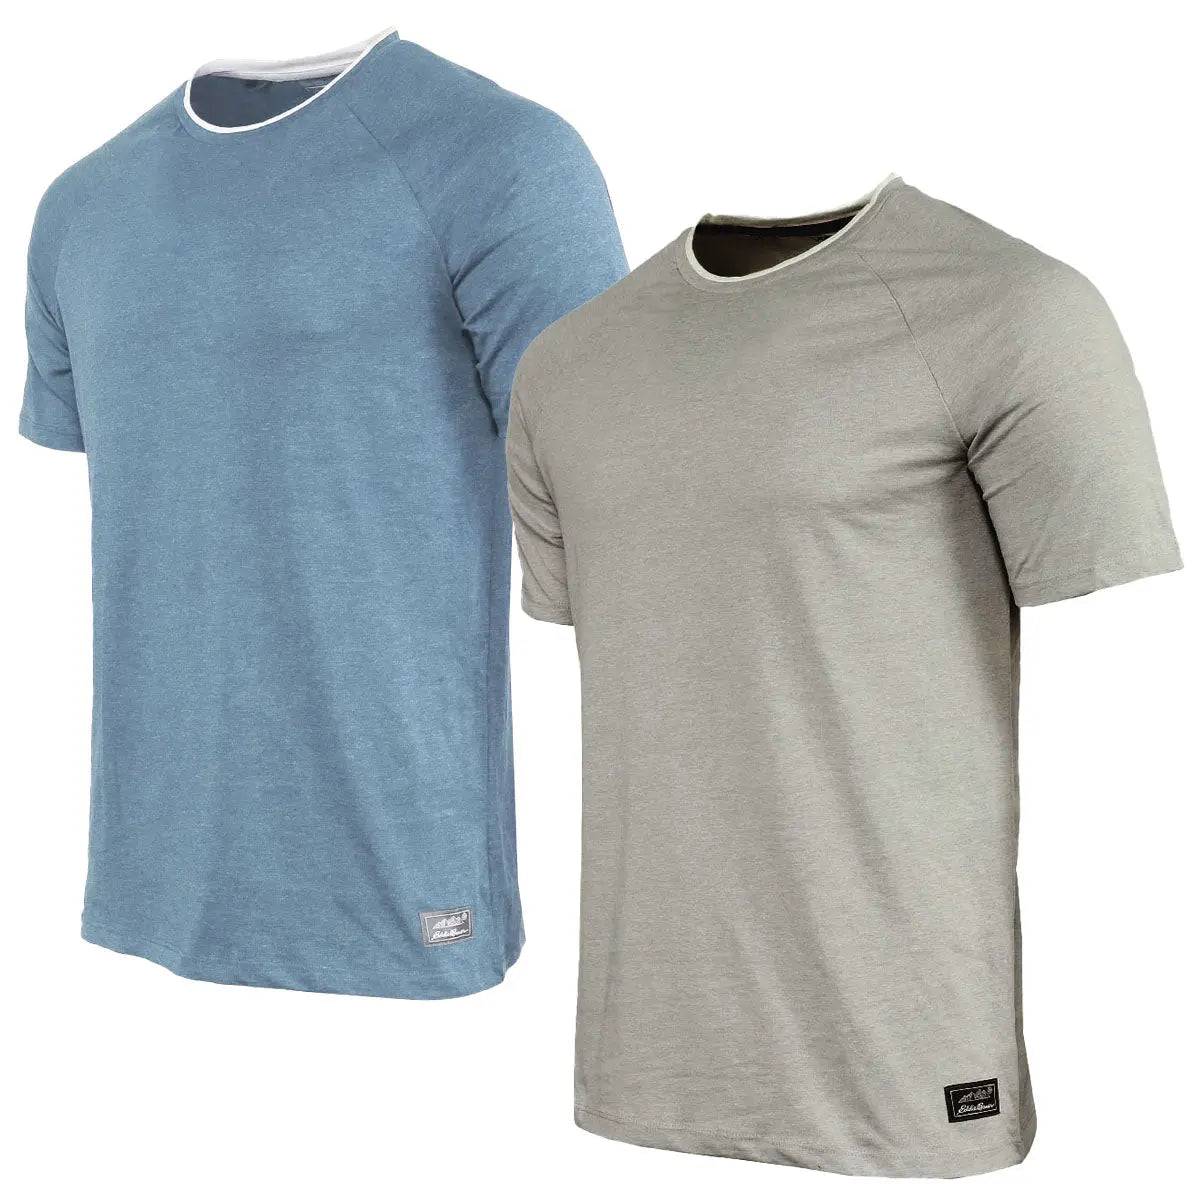 Get two 2-Pack Eddie Bauer Men’s 24 Hour Tees for $25